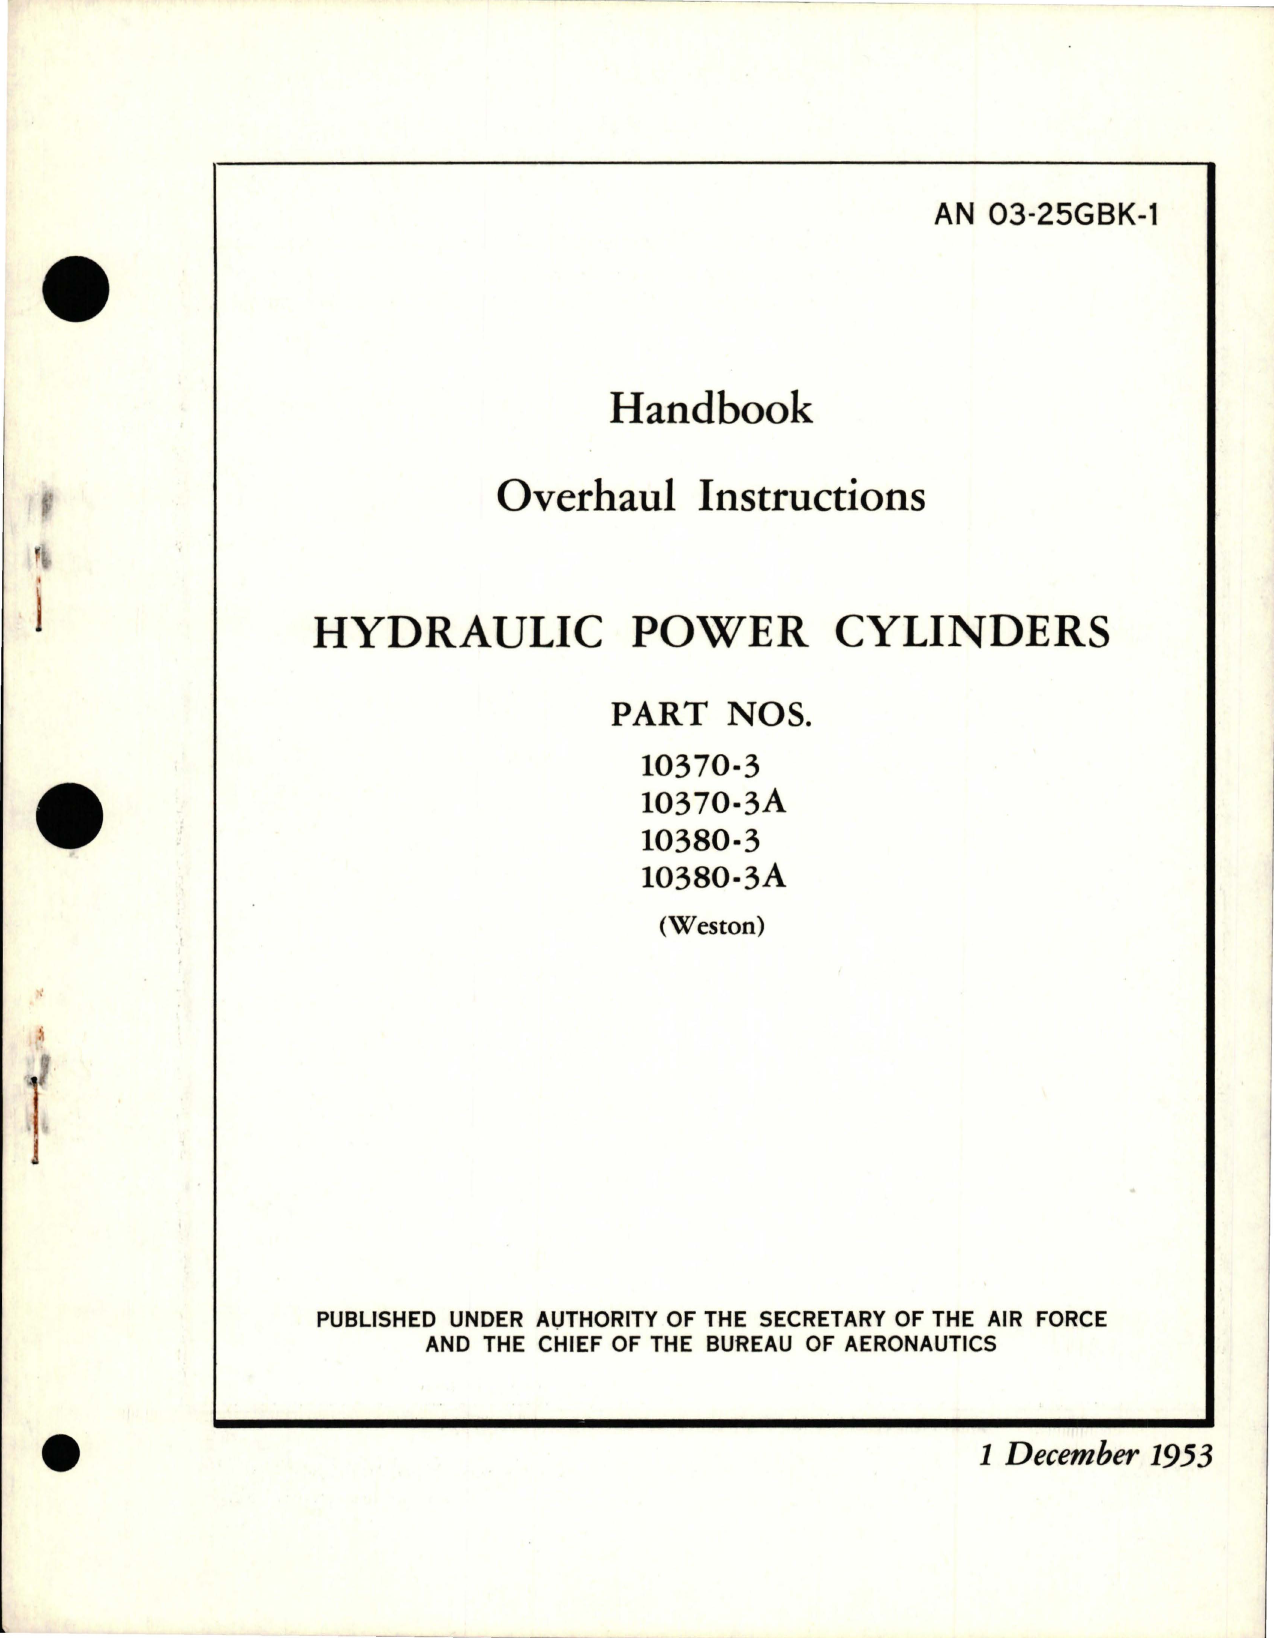 Sample page 1 from AirCorps Library document: Overhaul Instructions for Hydraulic Power Cylinders - Parts 10370-3, 10370-3A, 10380-3, and 10380-3A